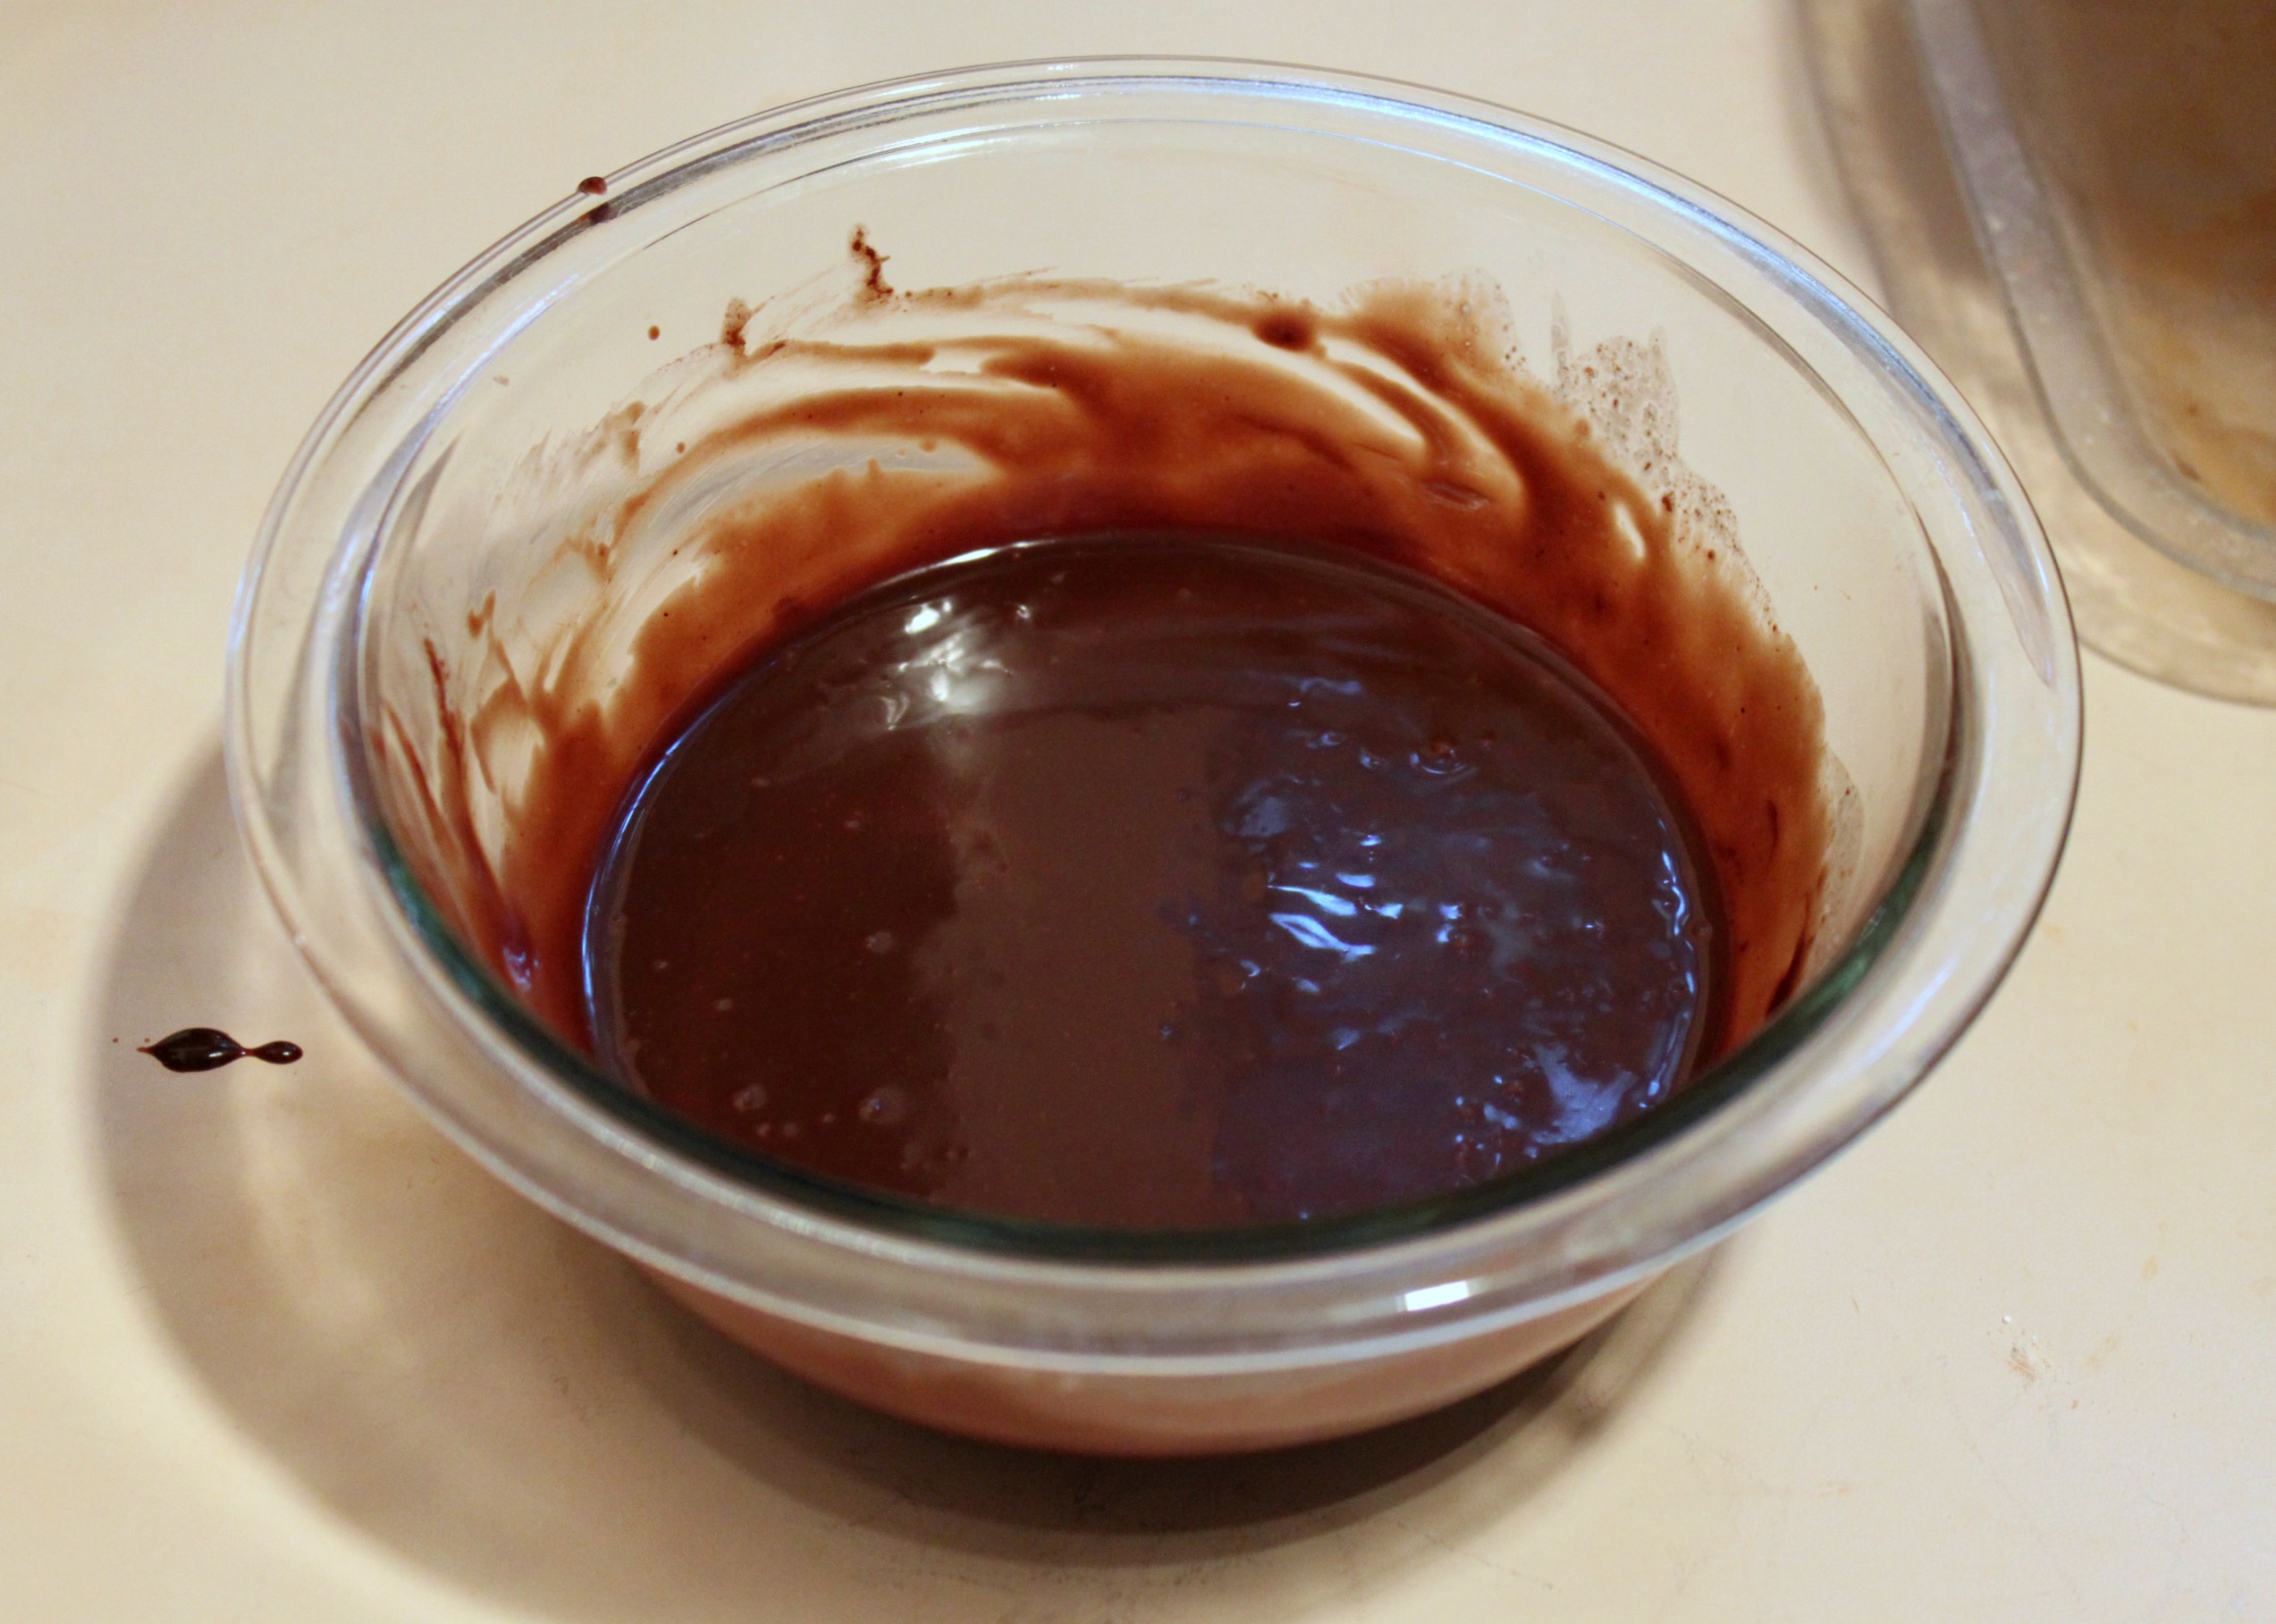 Mix until you have a smooth ganache